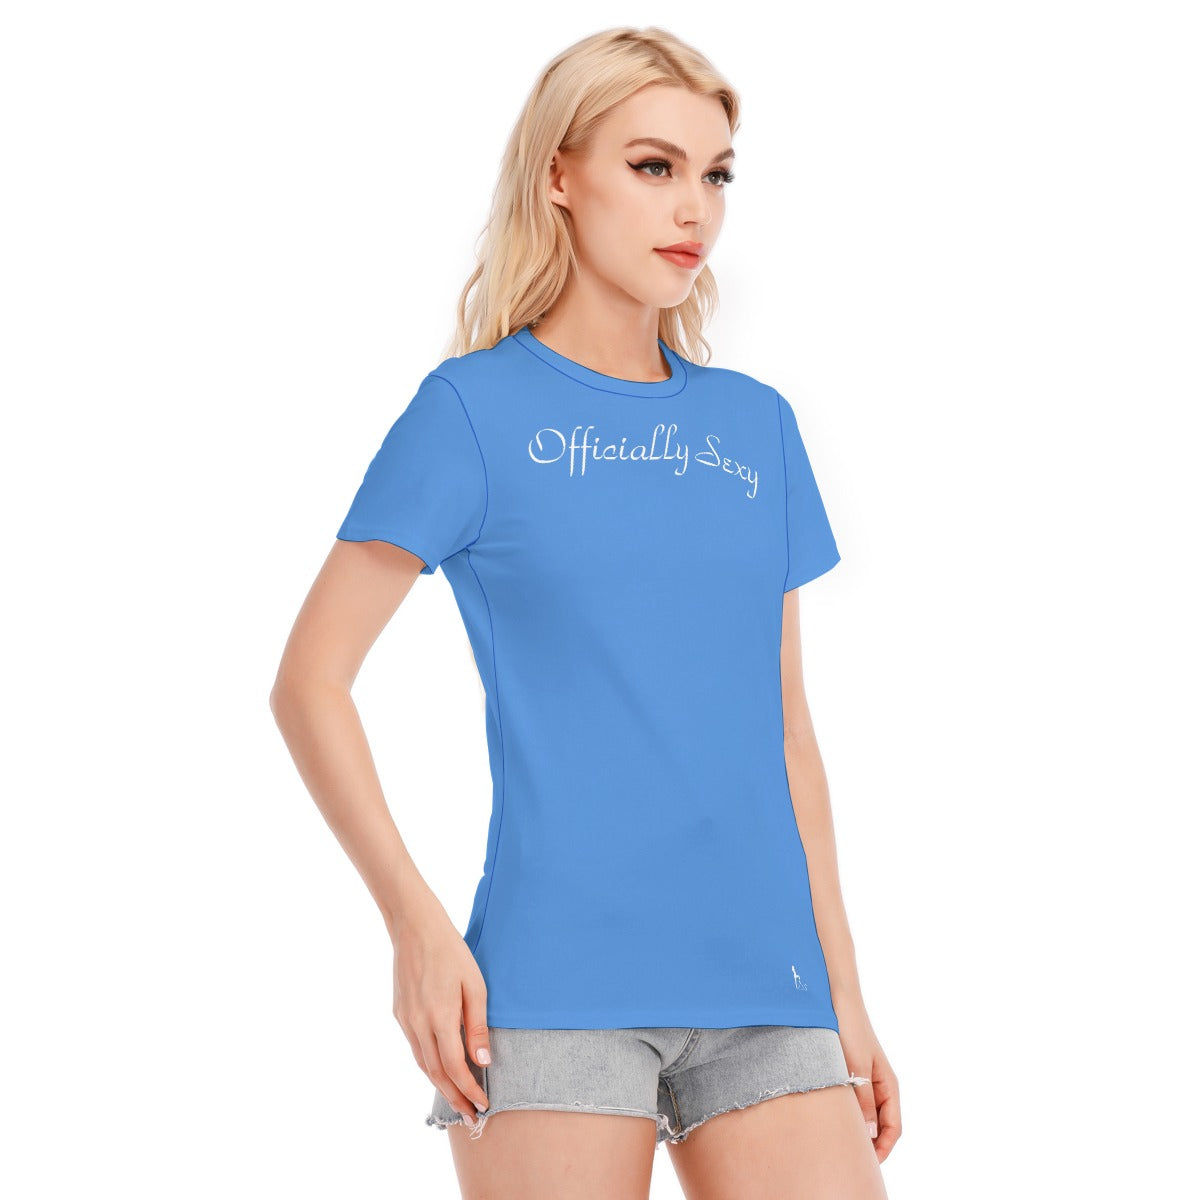 👚 Officially Sexy Cornflower With White Logo Women's Round Neck T-Shirt | 190GSM Cotton Color #9b9b9b 👚